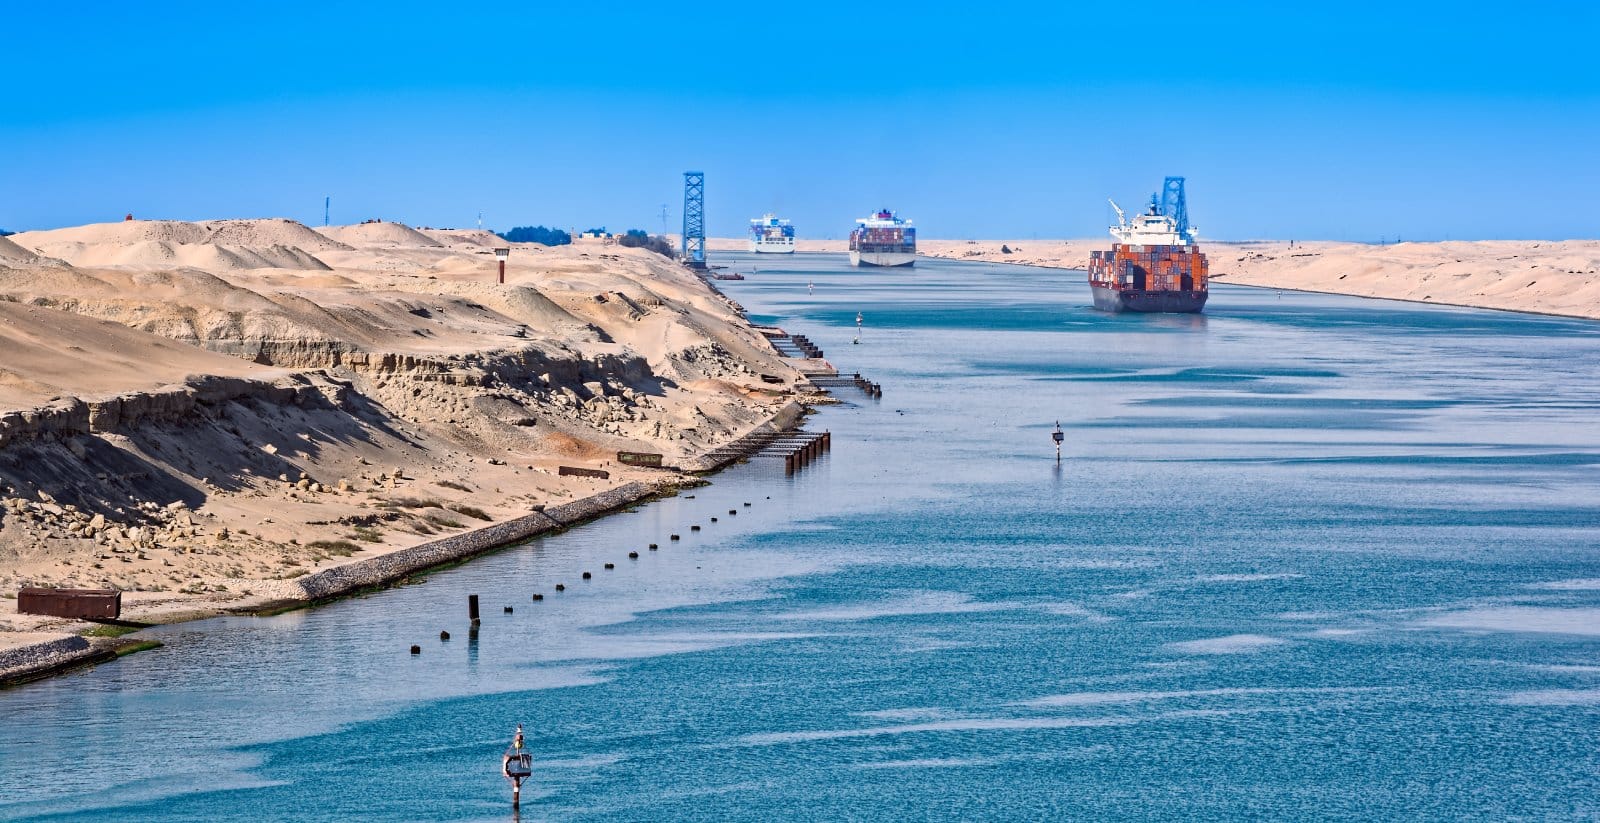 <p class="wp-caption-text">Image Credit: Shutterstock / Igor Grochev</p>  <p><span>The Suez Canal, an engineering marvel that connects the Mediterranean Sea to the Red Sea, has played a pivotal role in international trade routes since its completion in 1869. Observing the passage of ships through this man-made waterway offers a unique perspective on the complexities of global commerce and engineering. The canal’s strategic importance is matched by its historical significance, having been a focal point in international relations and conflicts. Visitors can explore the canal’s history further at the Suez Canal Authority’s museum in Ismailia, which provides comprehensive insights into its construction, operation, and impact on global navigation.</span></p>